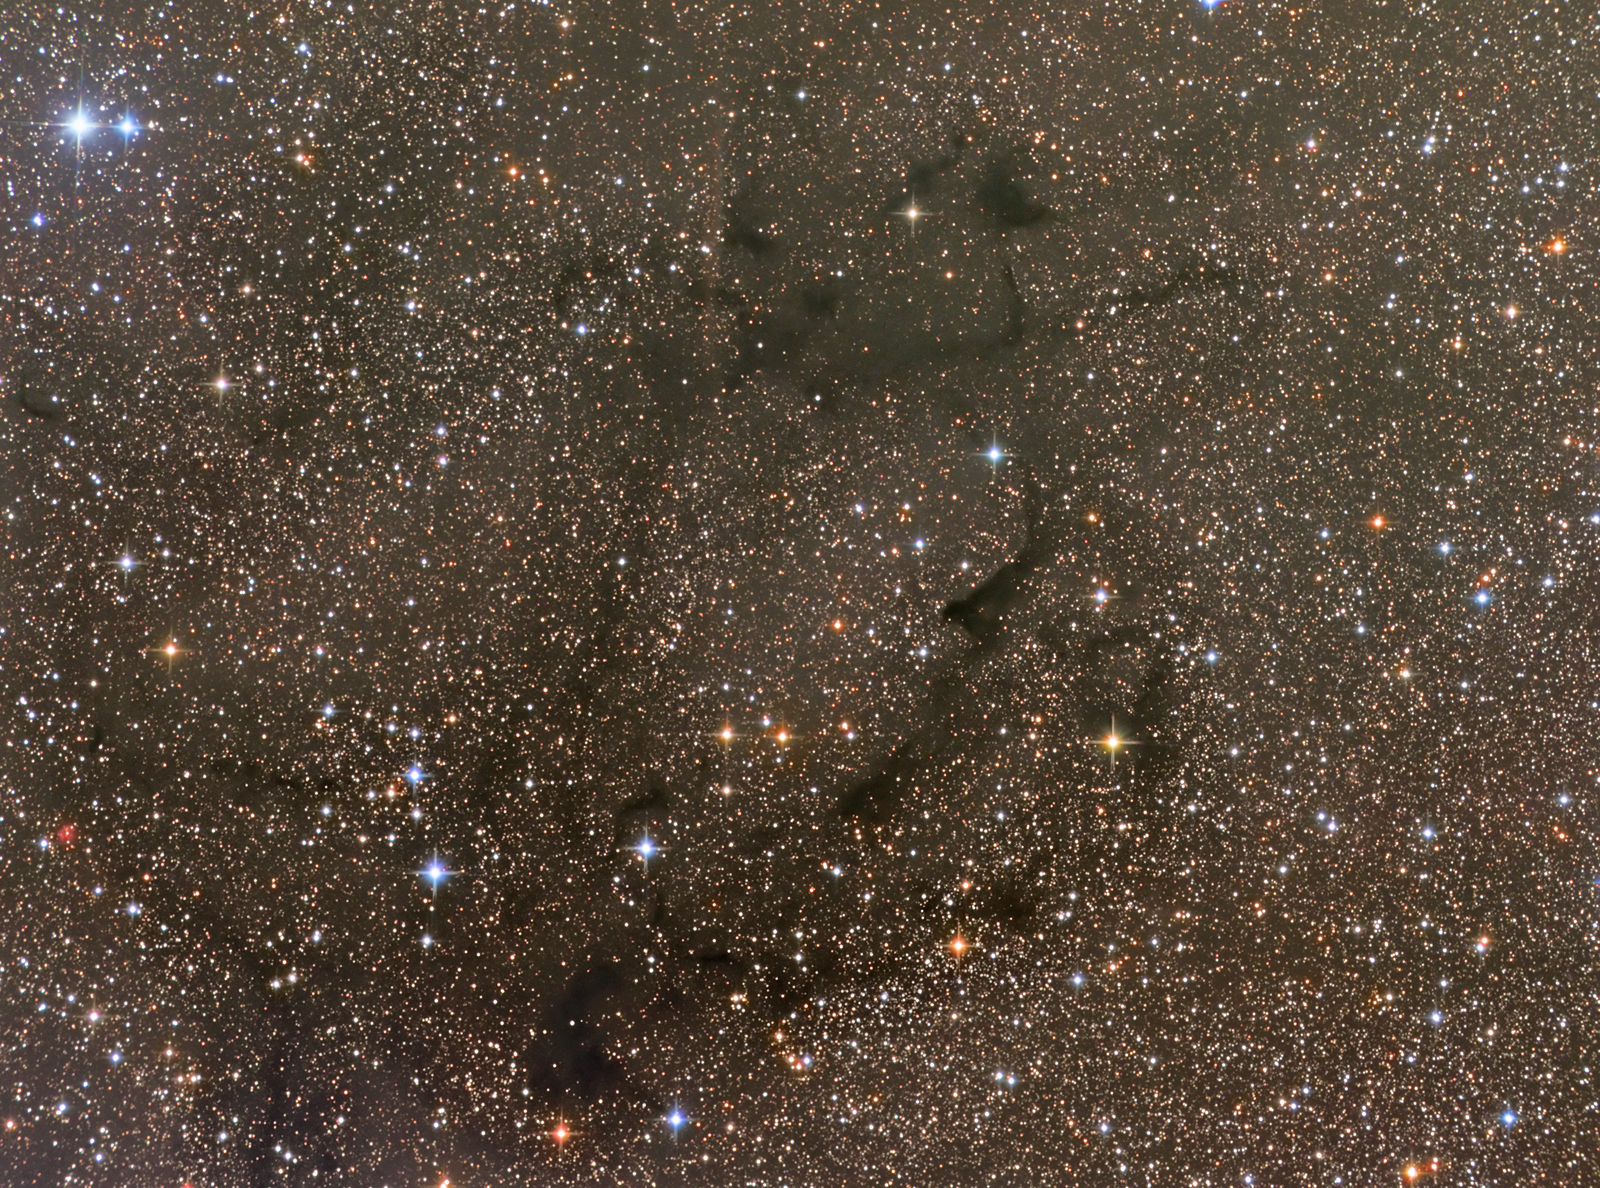 Barnard 169 and Barnard 171 + (new?) Unknown Object / 1600 pixels wide